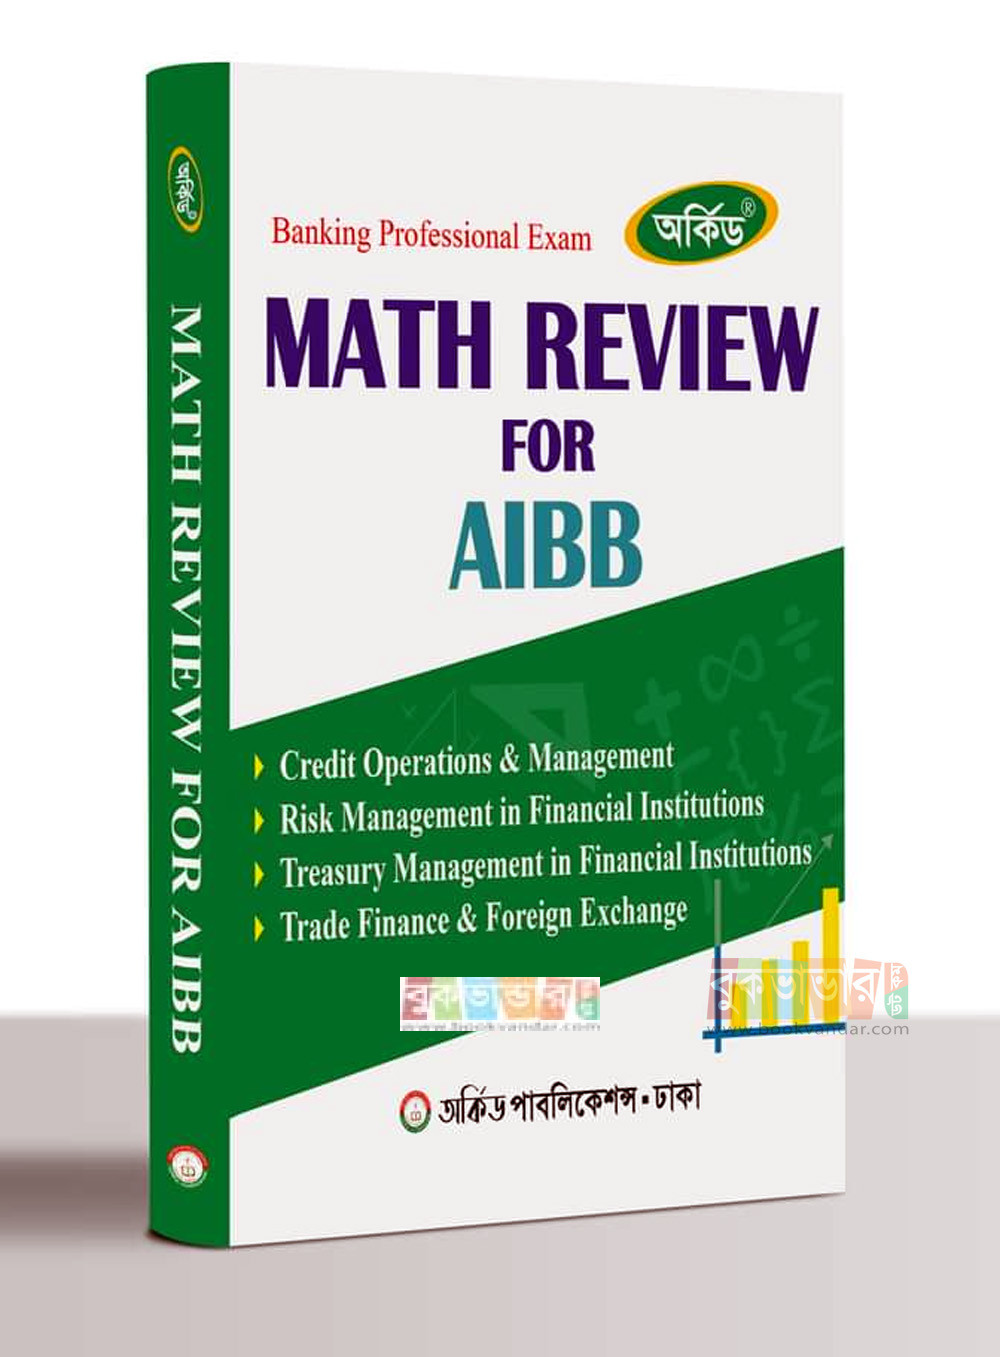 Orchid math review for AIBB